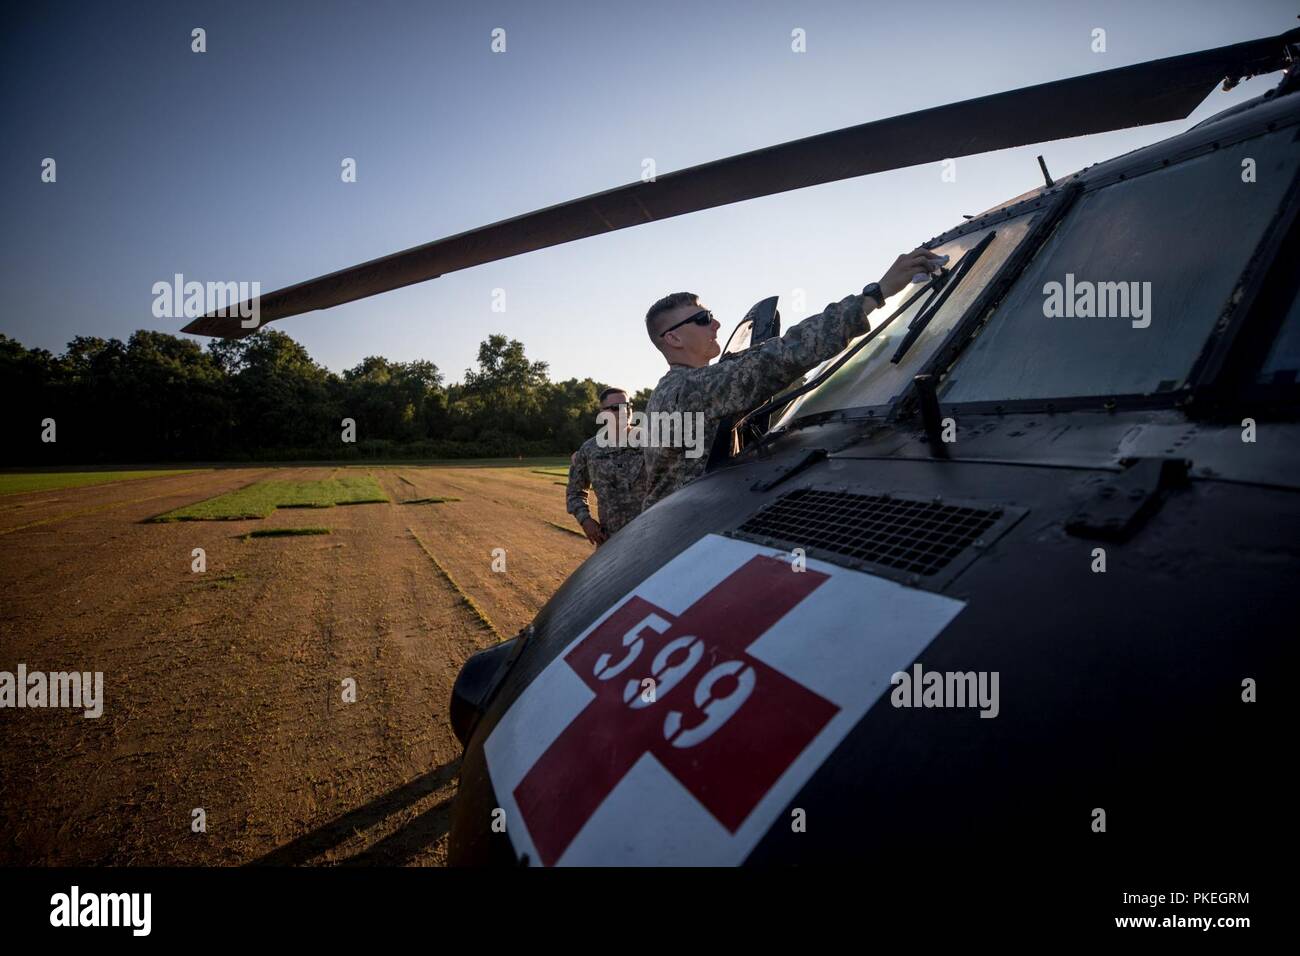 U.S. Army 1st Lt. Brandon Zakris, assigned to C Co., 1-171st GSAB (Medevac), Rochester, N.Y., prepares a UH-60 Blackhawk before competition jumps begin during Leapfest at the University of Rhode Island, West Kingston, R.I., Aug. 5, 2018. Leapfest is the largest, longest standing, international static line parachute training event and competition hosted by the 56th Troop Command, Rhode Island Army National Guard to promote high level technical and esprit de corps within the International Airborne community. Stock Photo